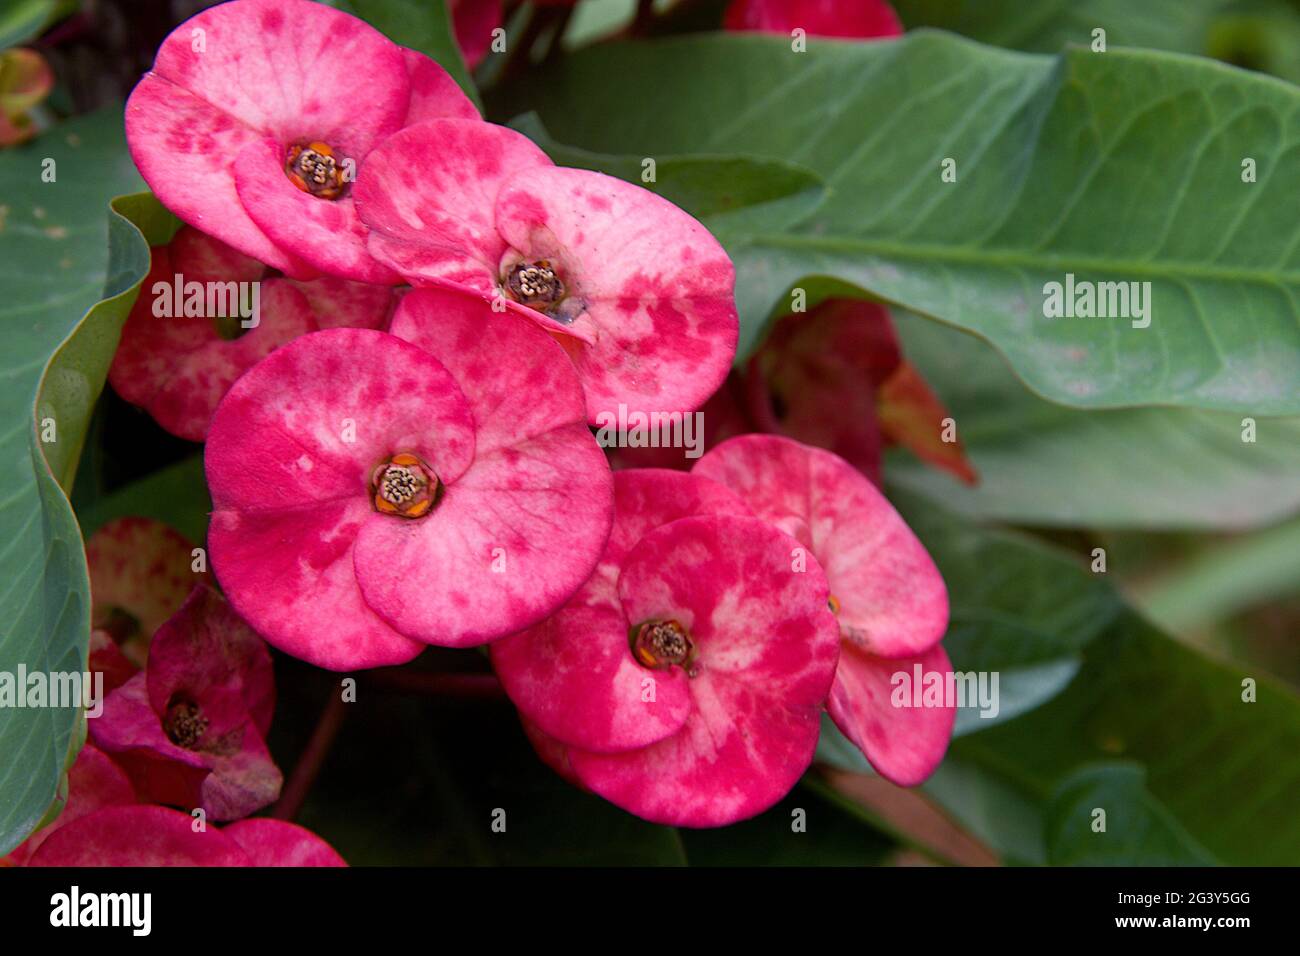 Bunch of Rich, Pink Colored Flowers Stock Photo